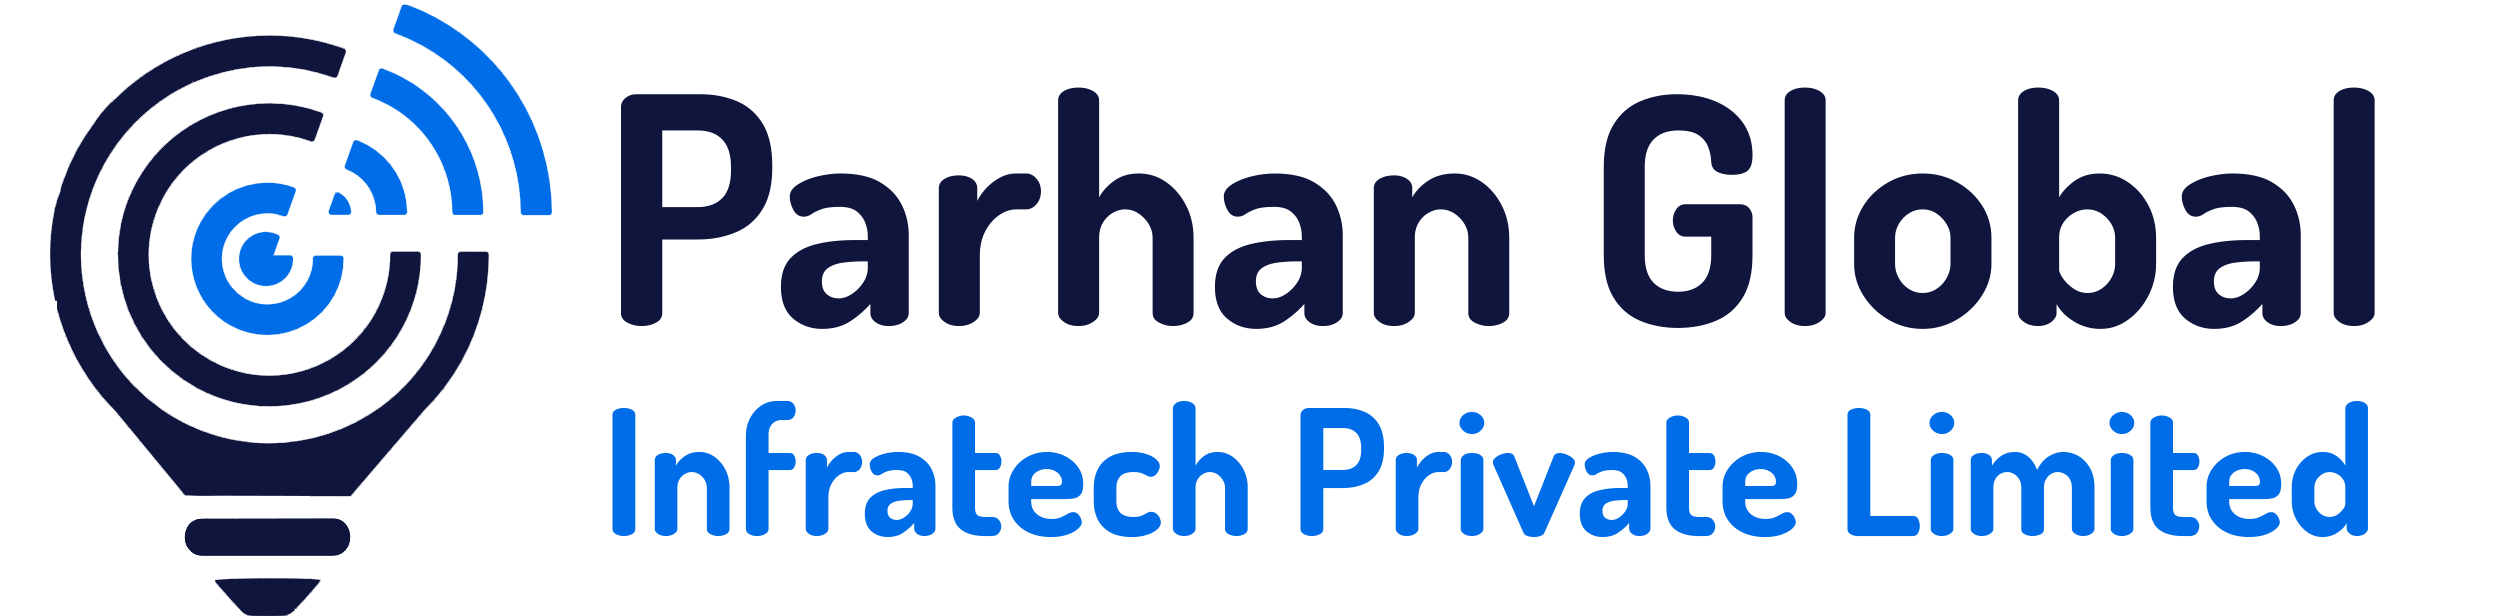 Parhan Global Infratech Private Limited